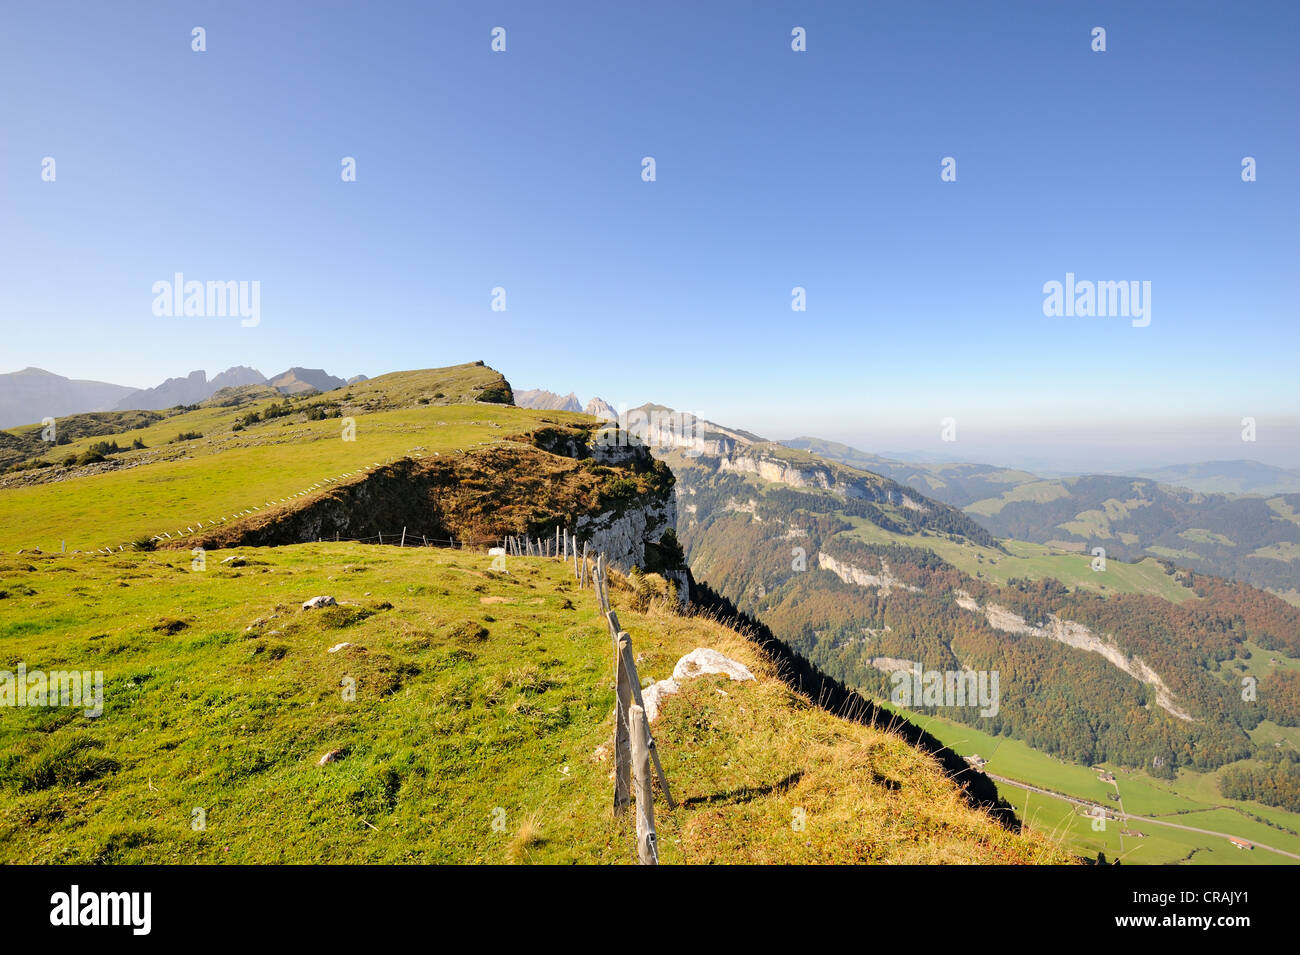 Escarpment on the high plateau Alp Sigel, 1730 m, with the view over the Appenzell region towards Ebenalp Mountain Stock Photo